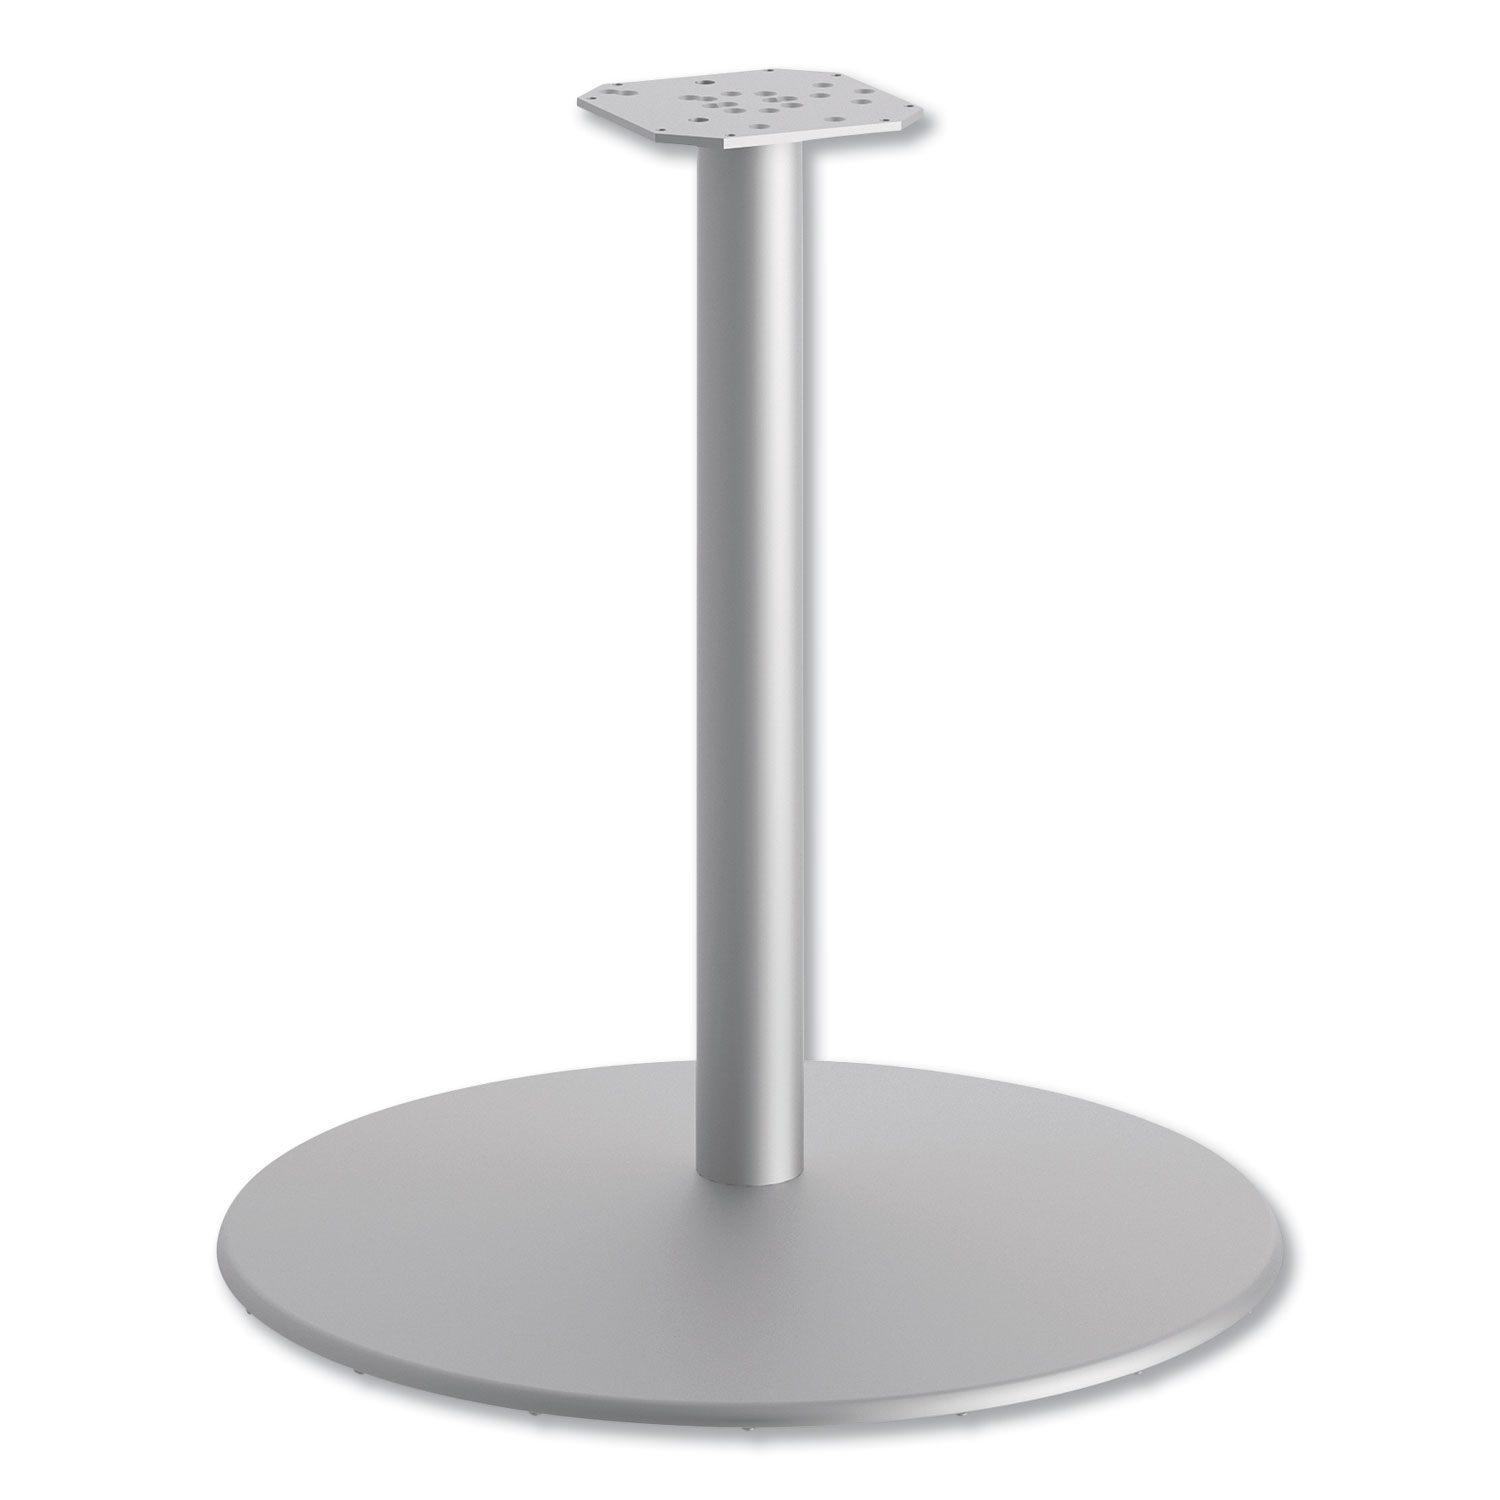  HON HONHBTTD30 Between Round Disc Base for 30 Table Tops, Textured Silver (HONHBTTD30) 